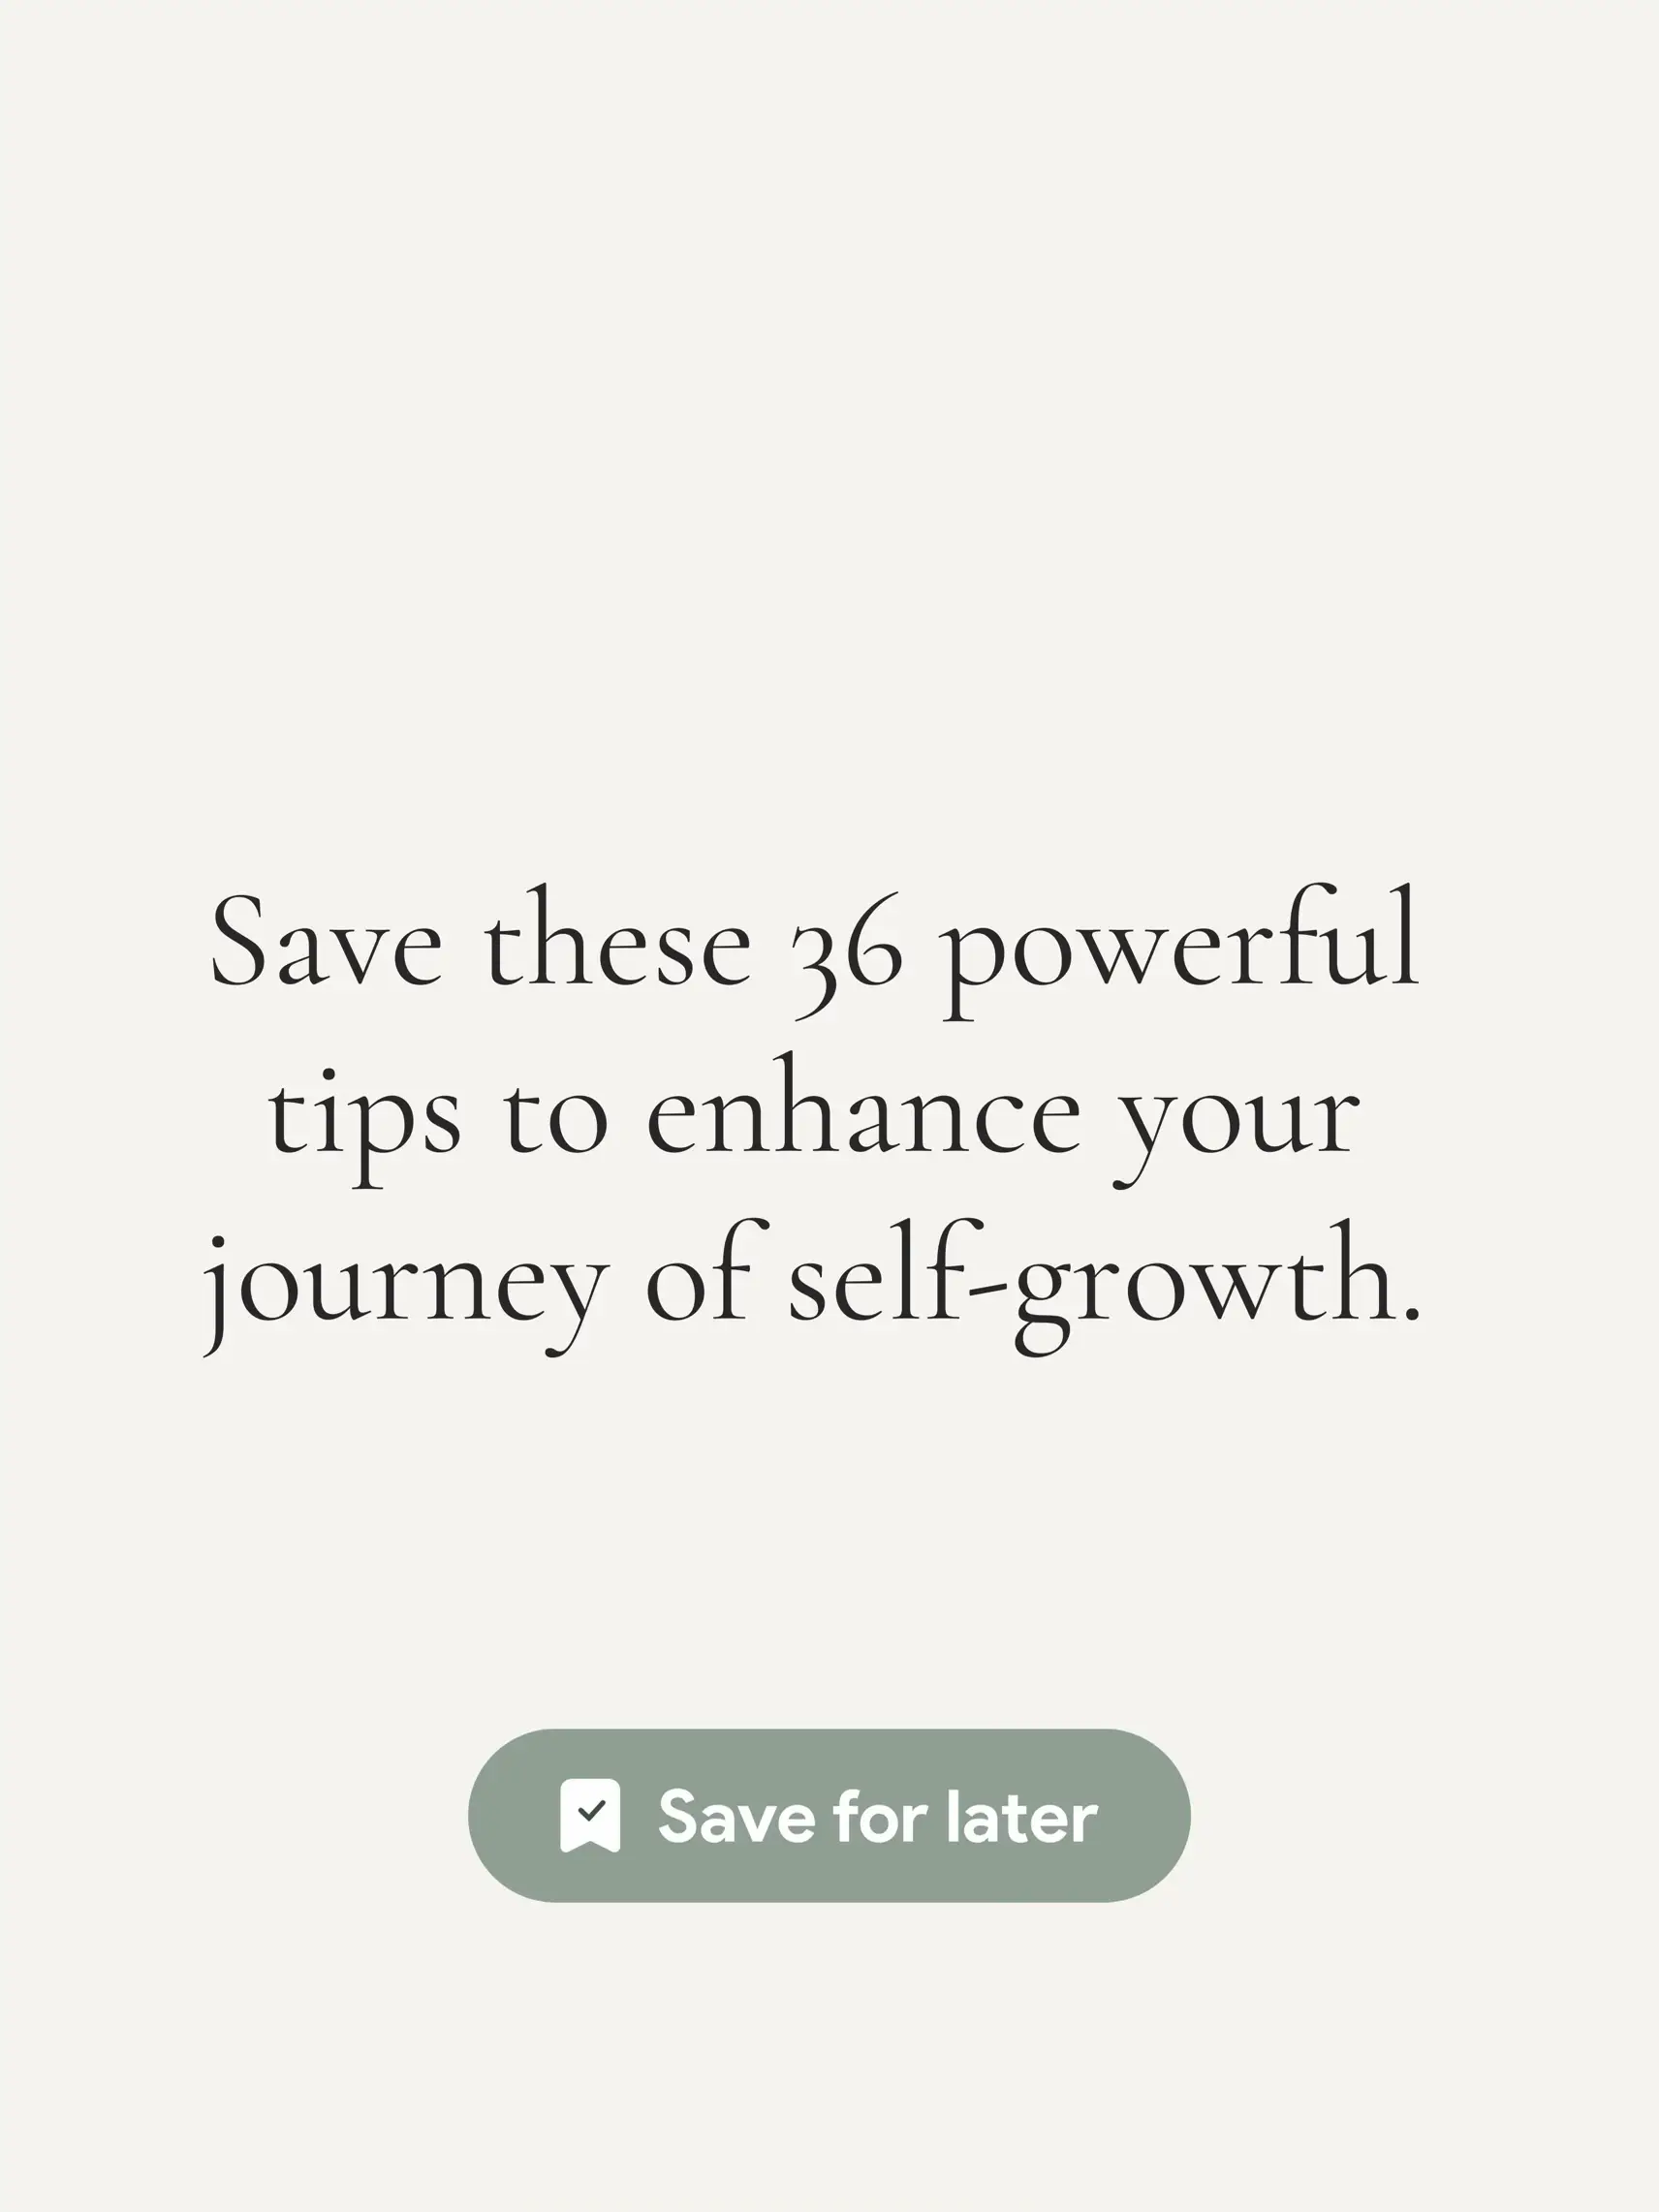  A screen showing a list of 36 self-growth tips.